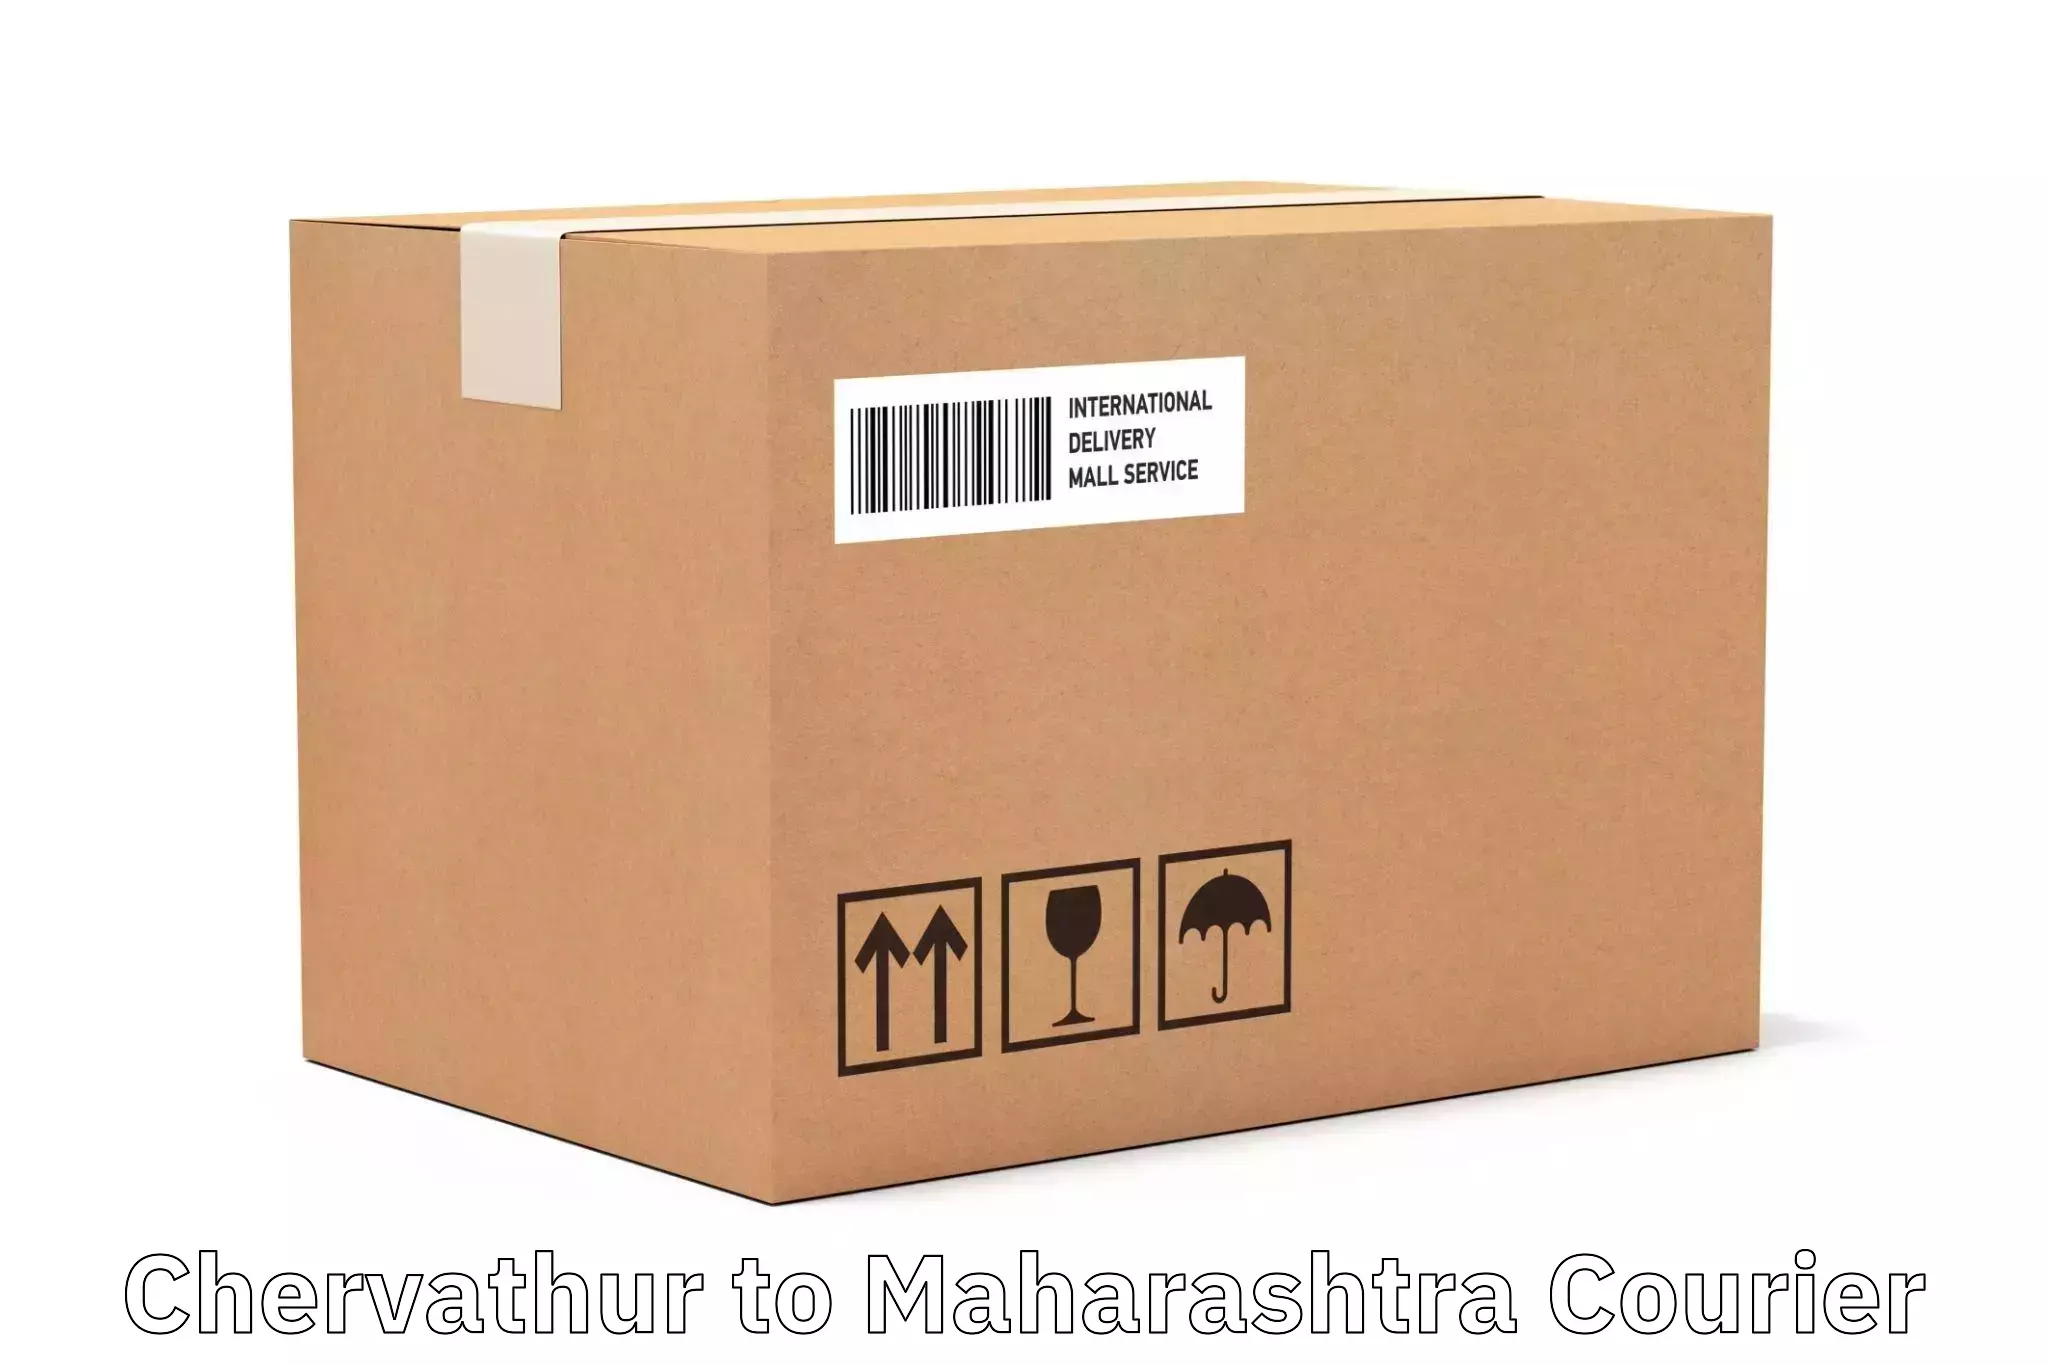 High-quality delivery services Chervathur to Mangrulpir